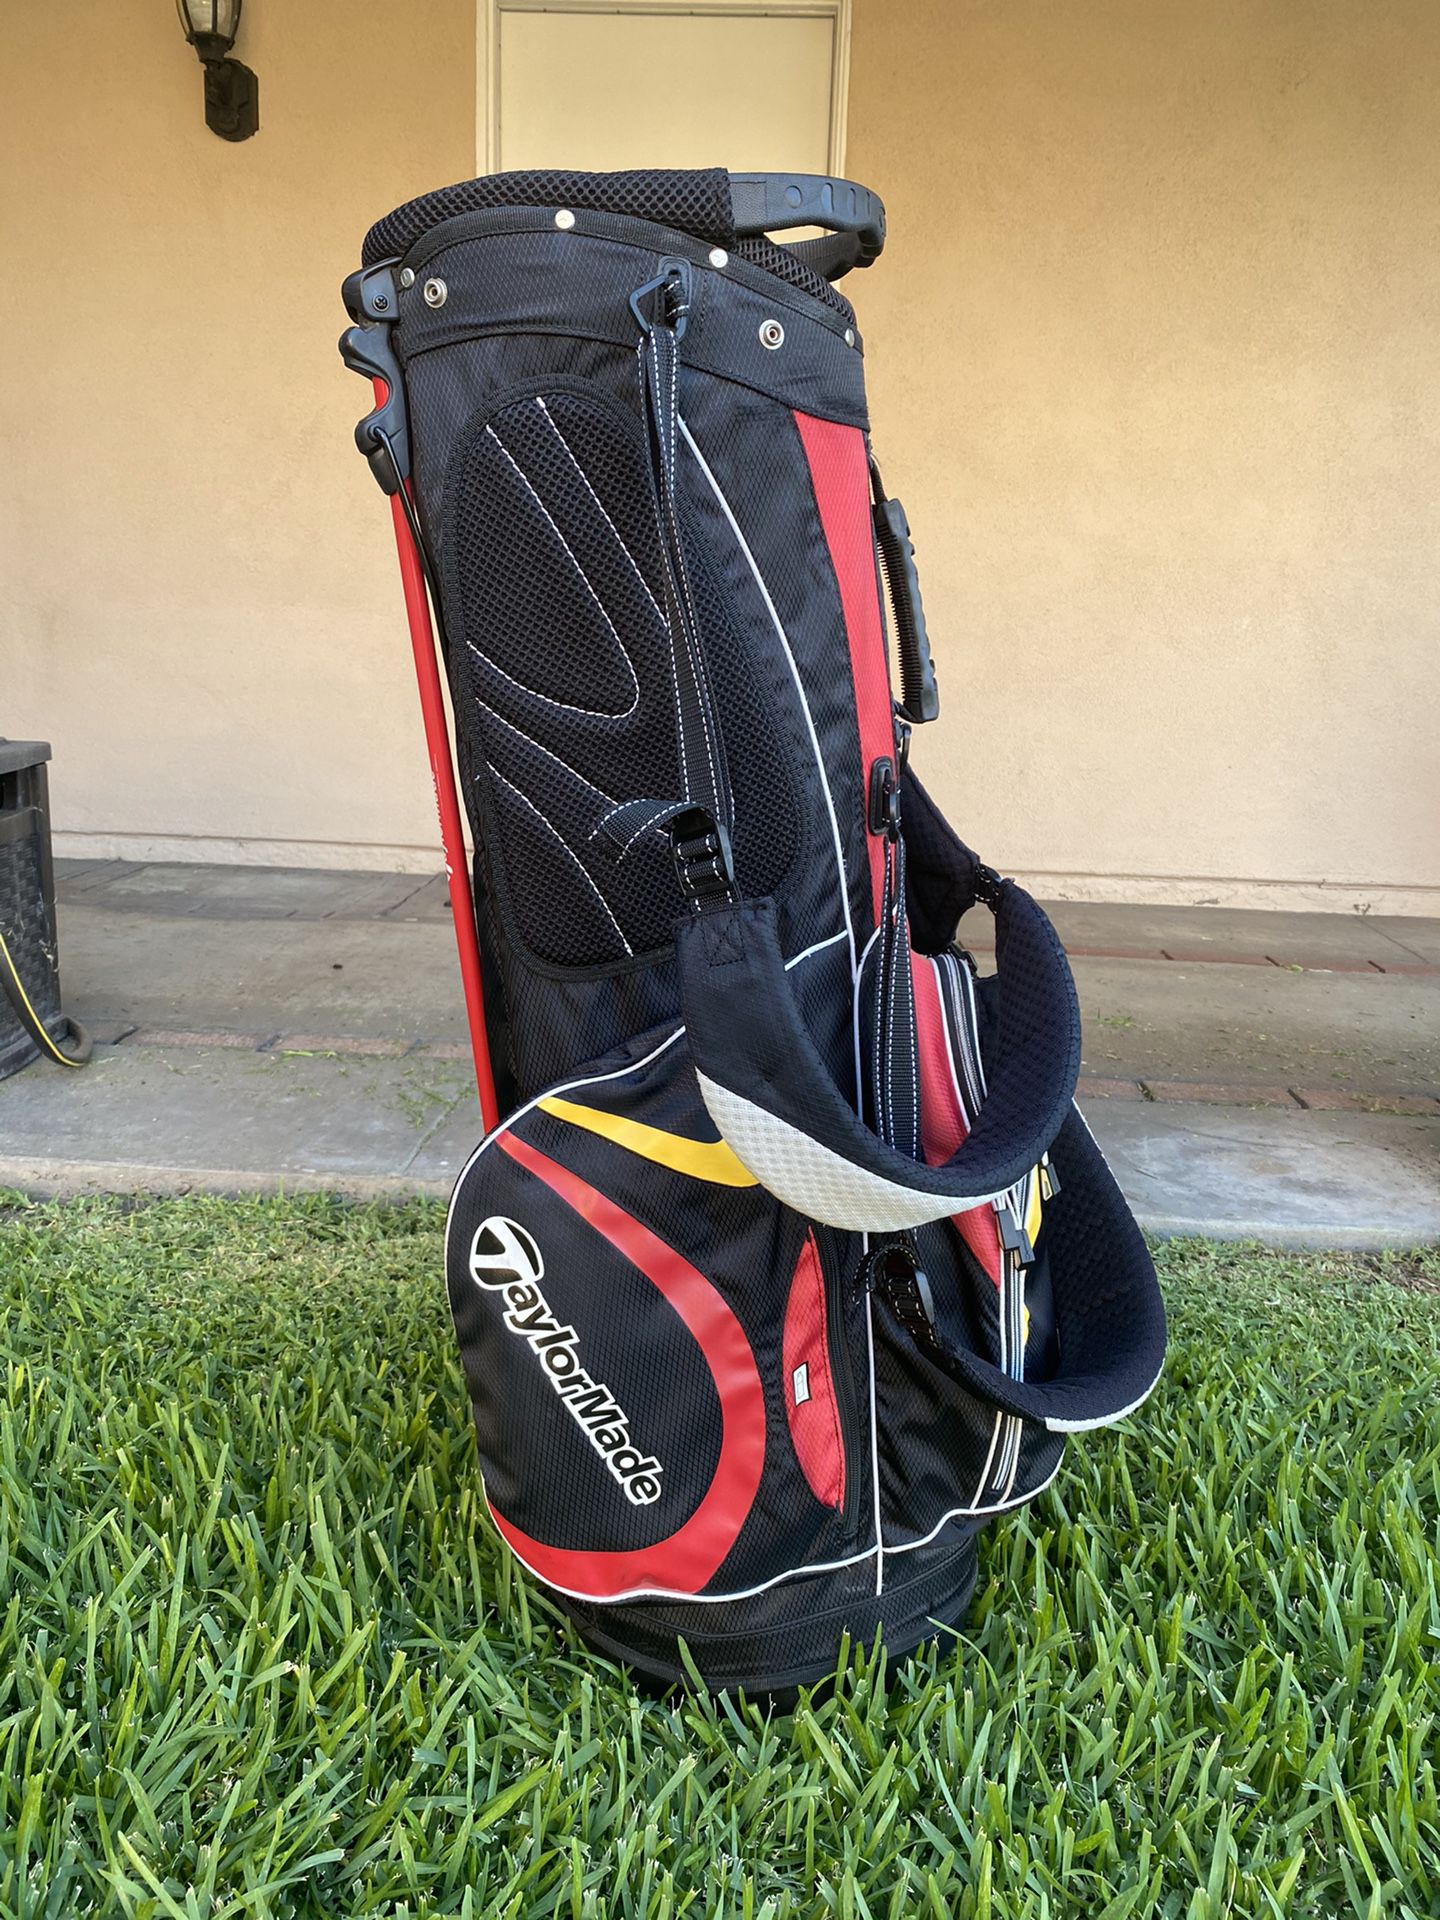 Taylormade Golf Bag- Mint Condition